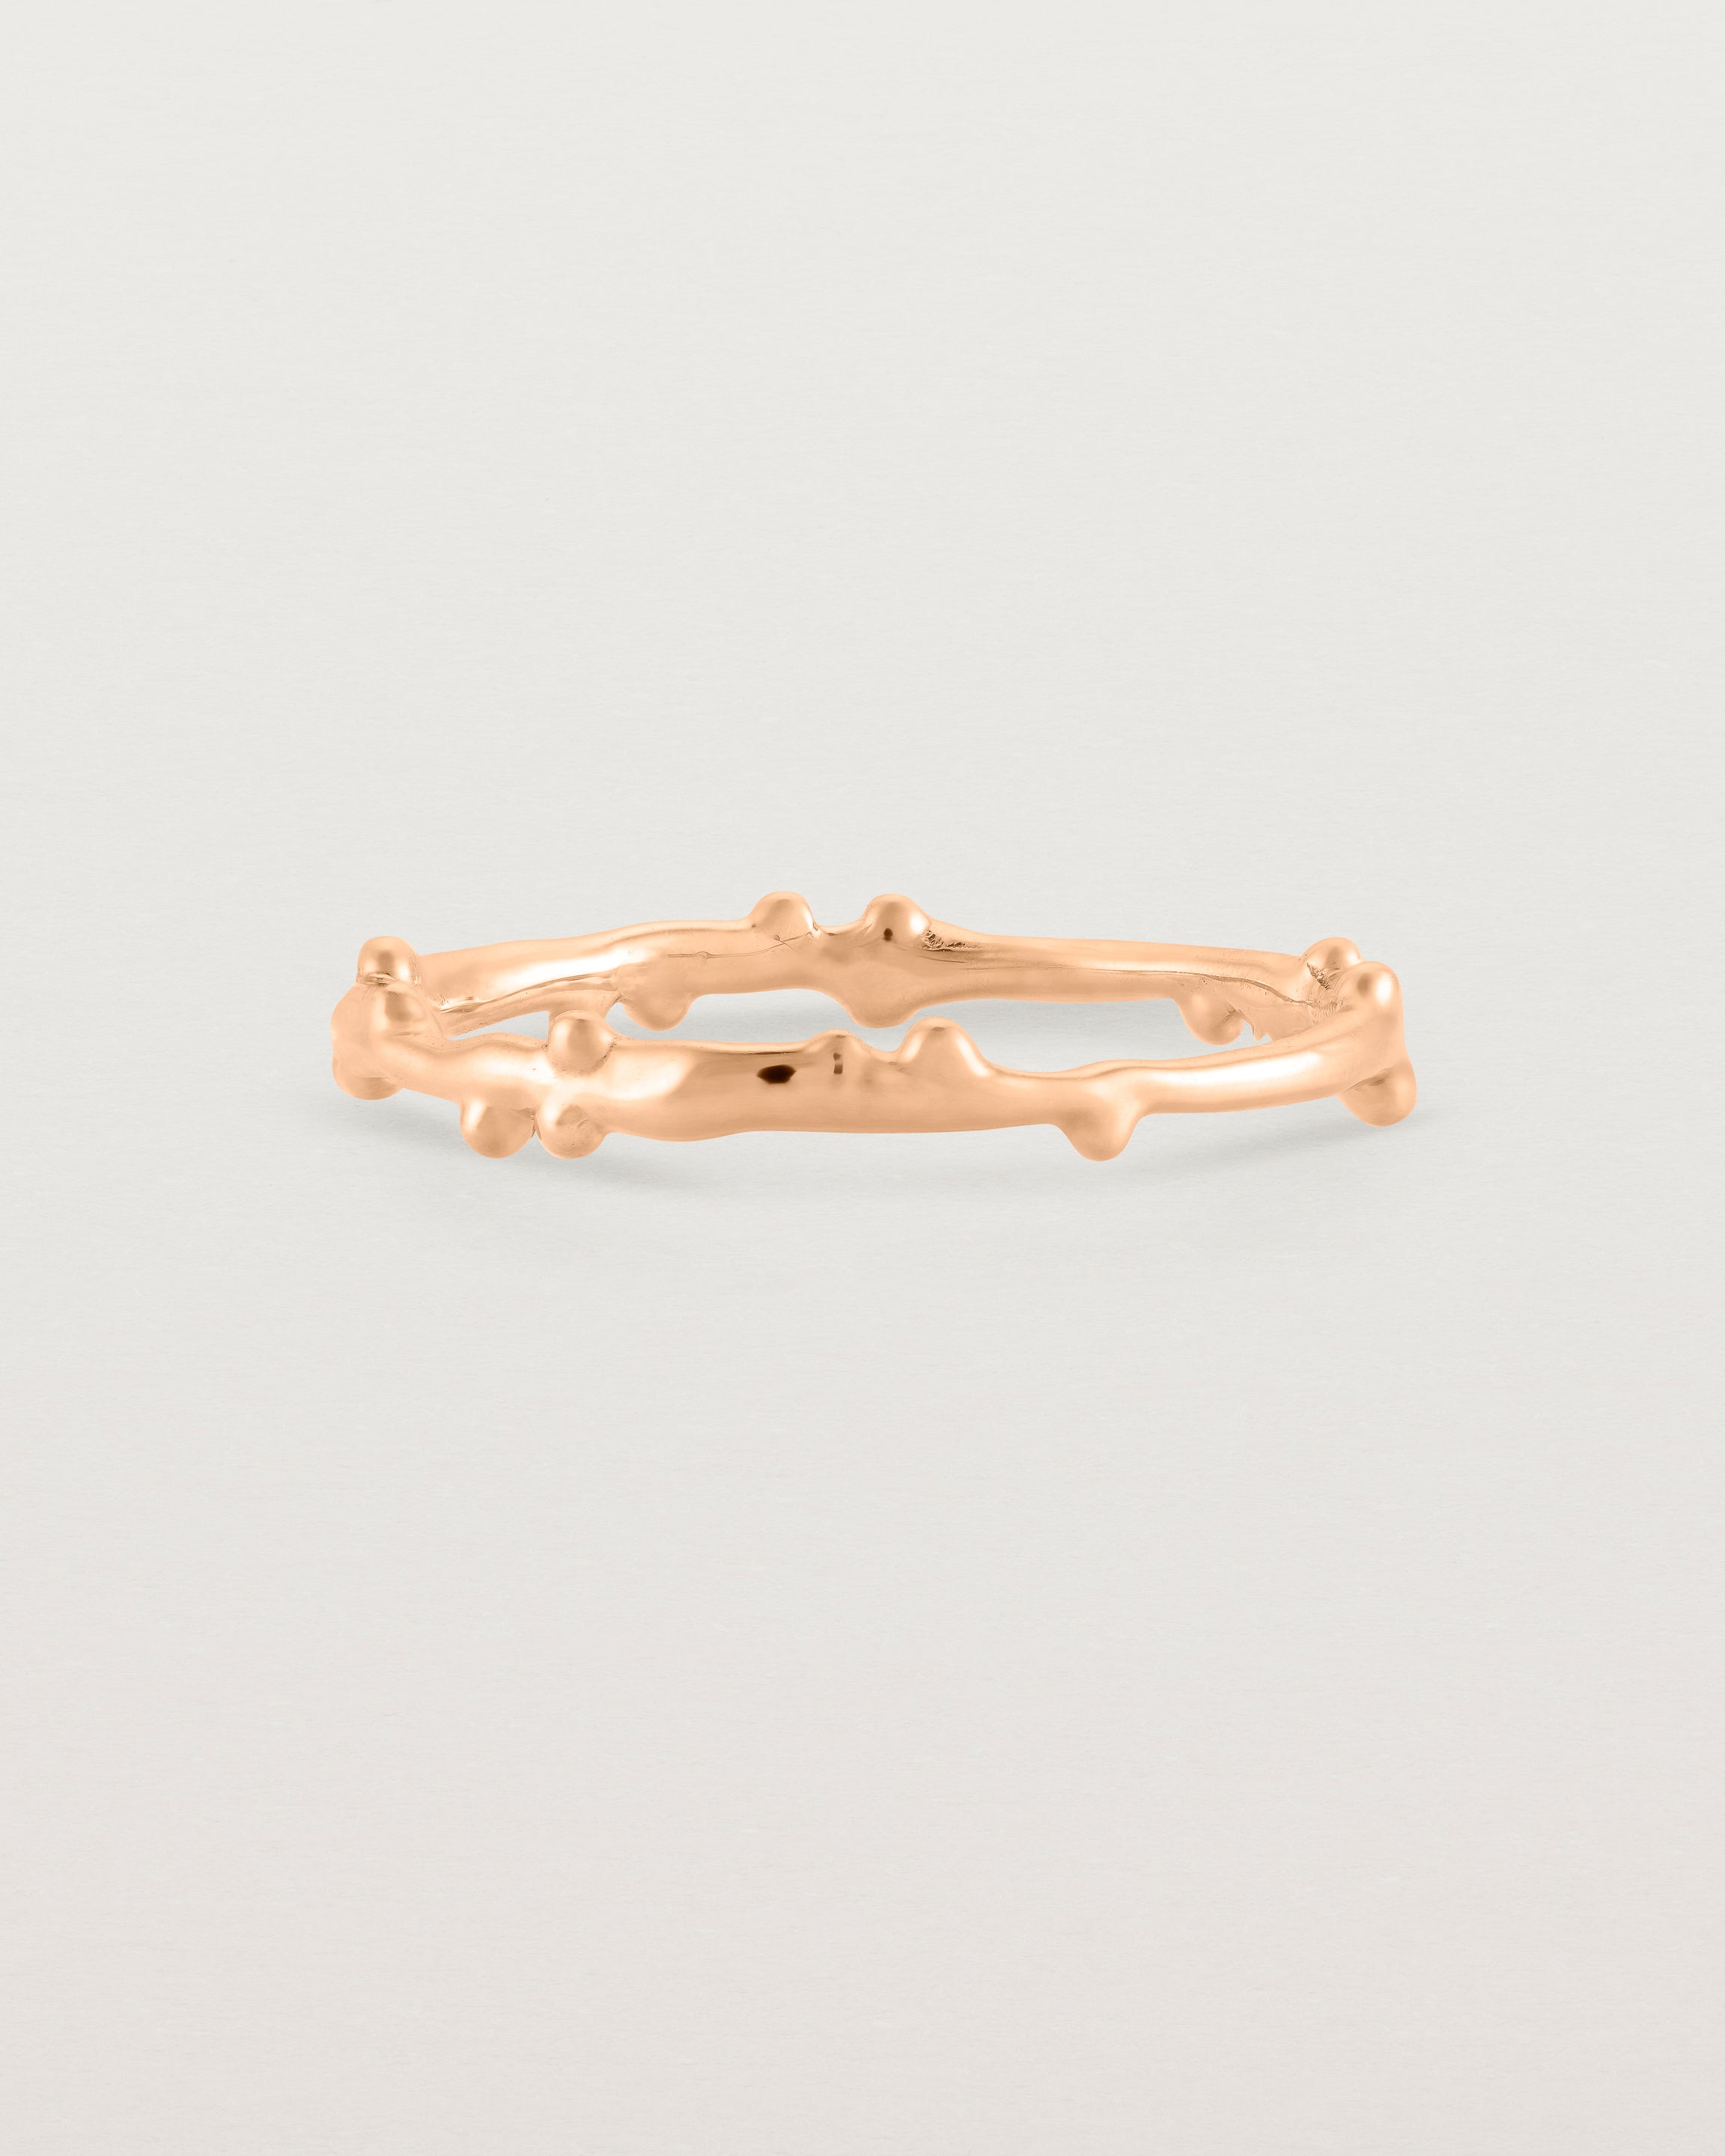 The Dotted Organic Stacking Ring in Rose Gold.